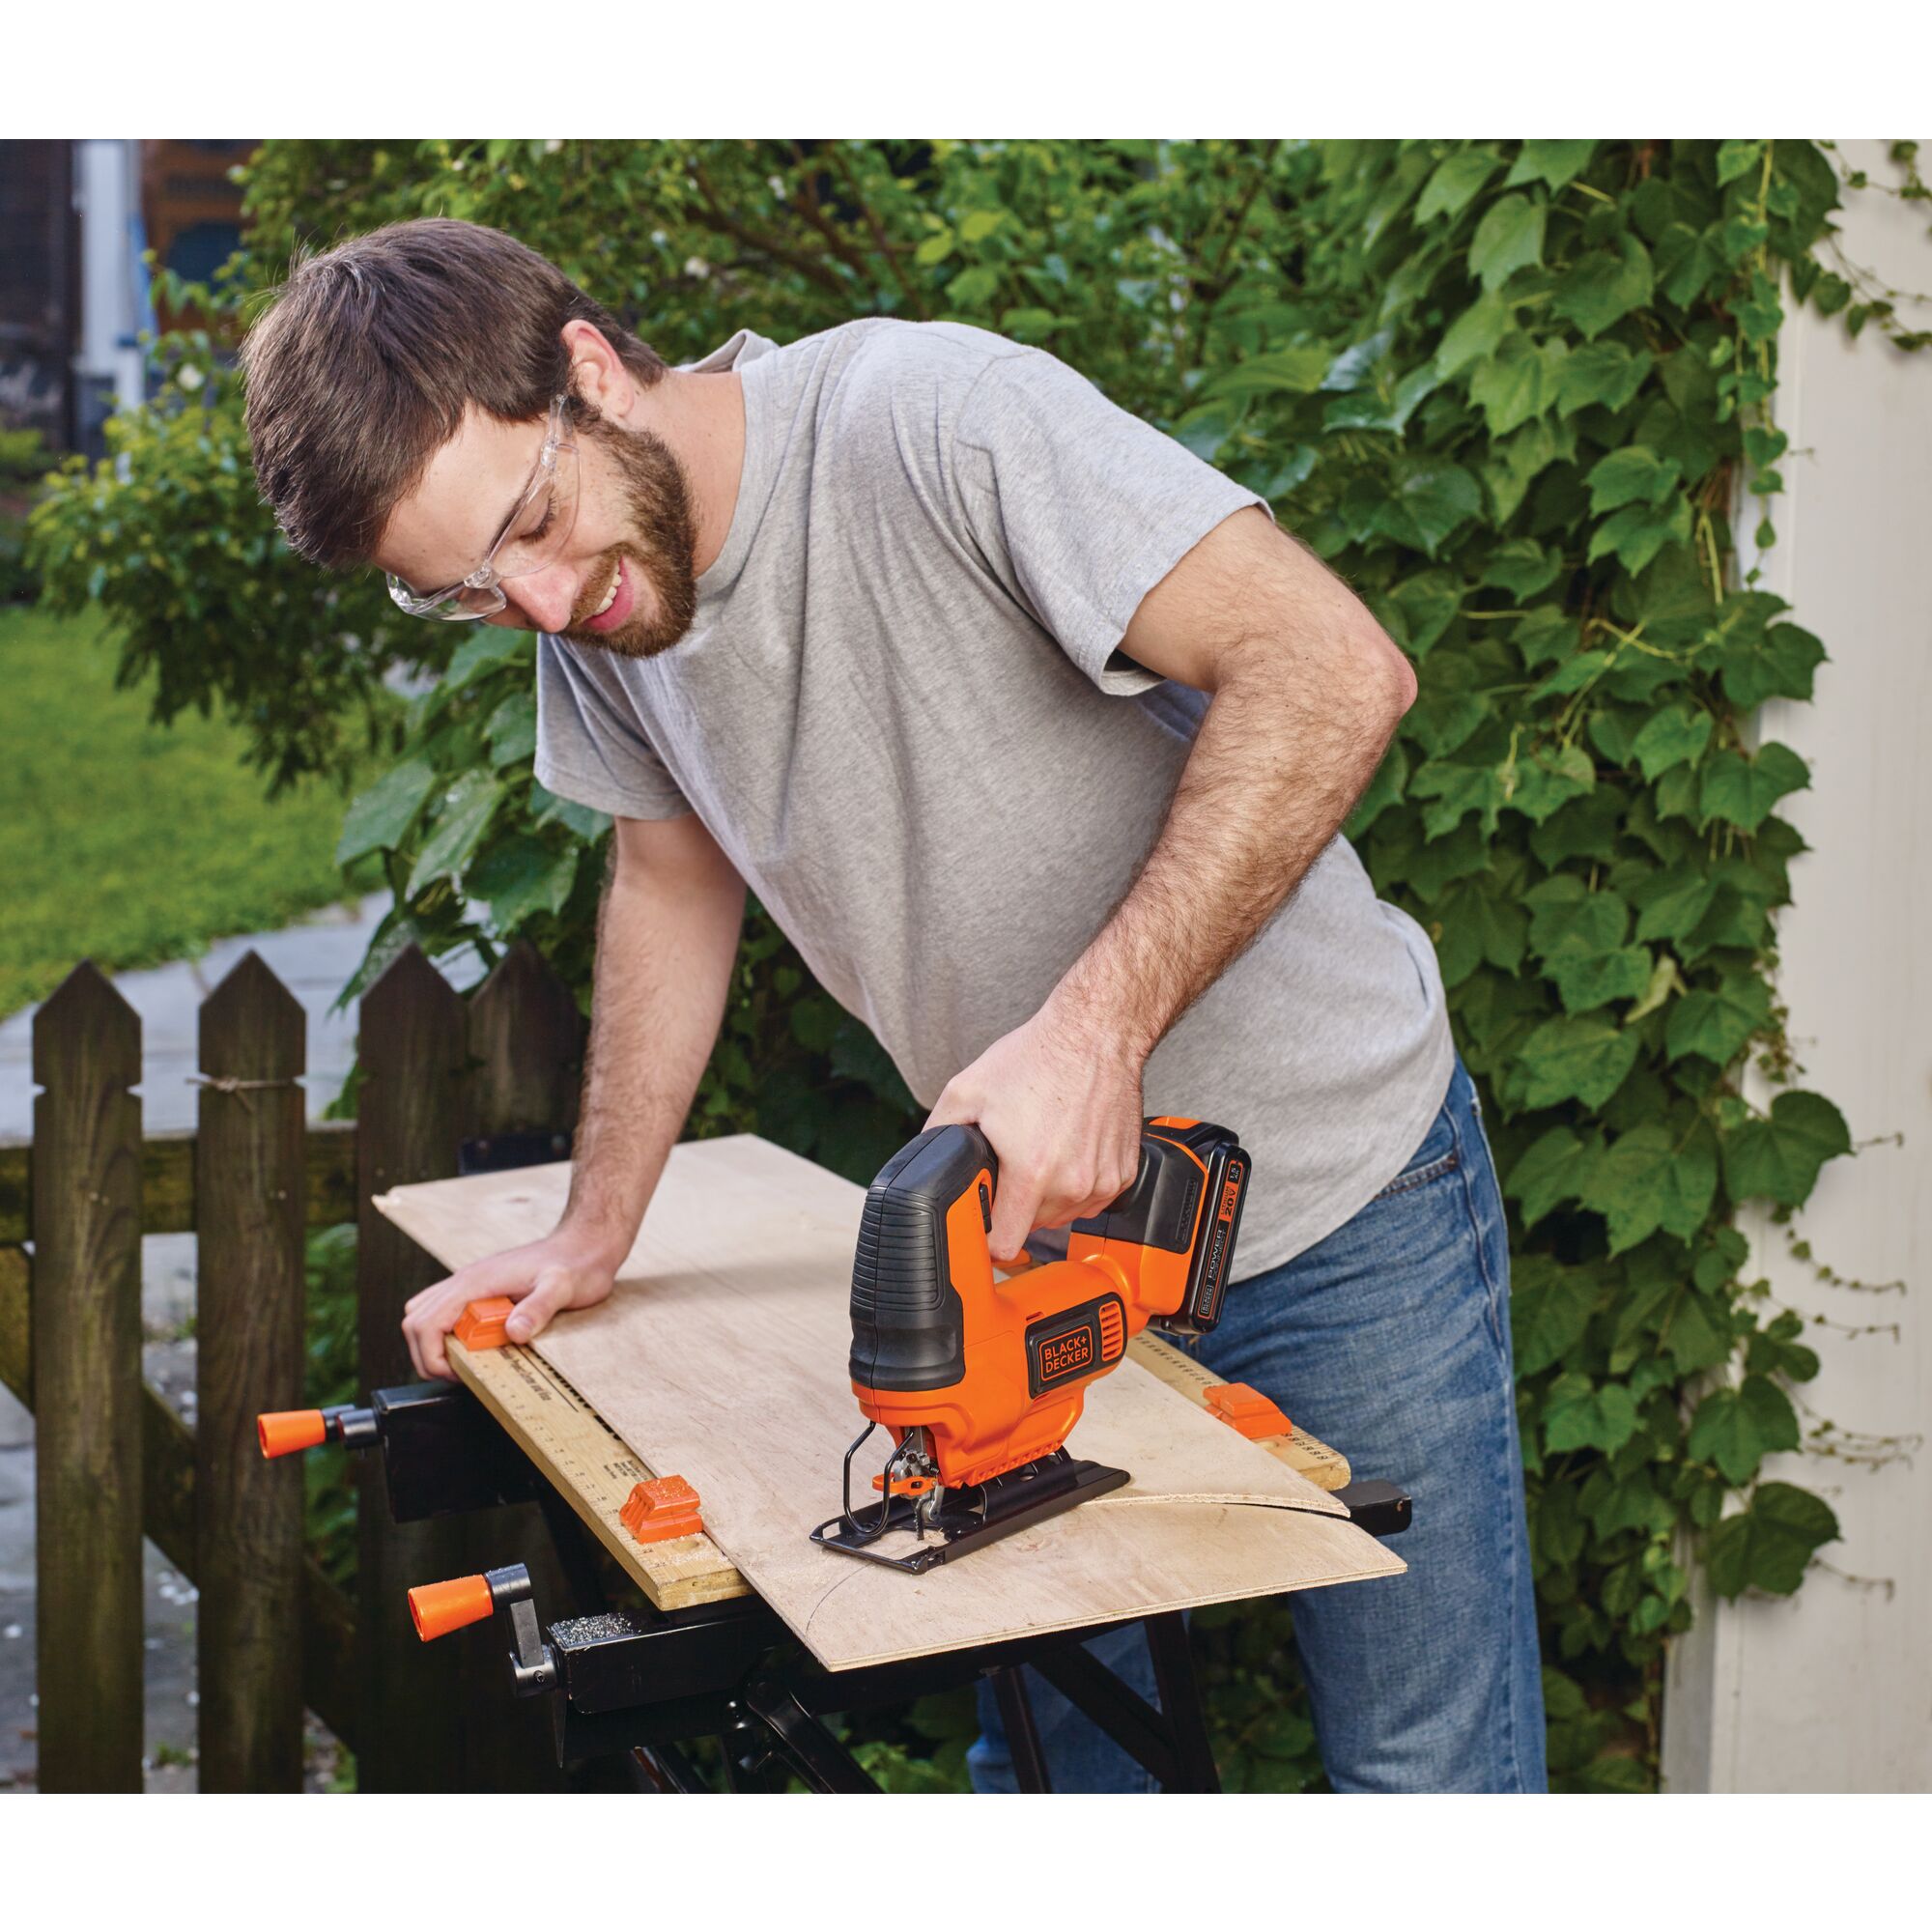 Cordless Jigsaw being used for cutting plywood by person.